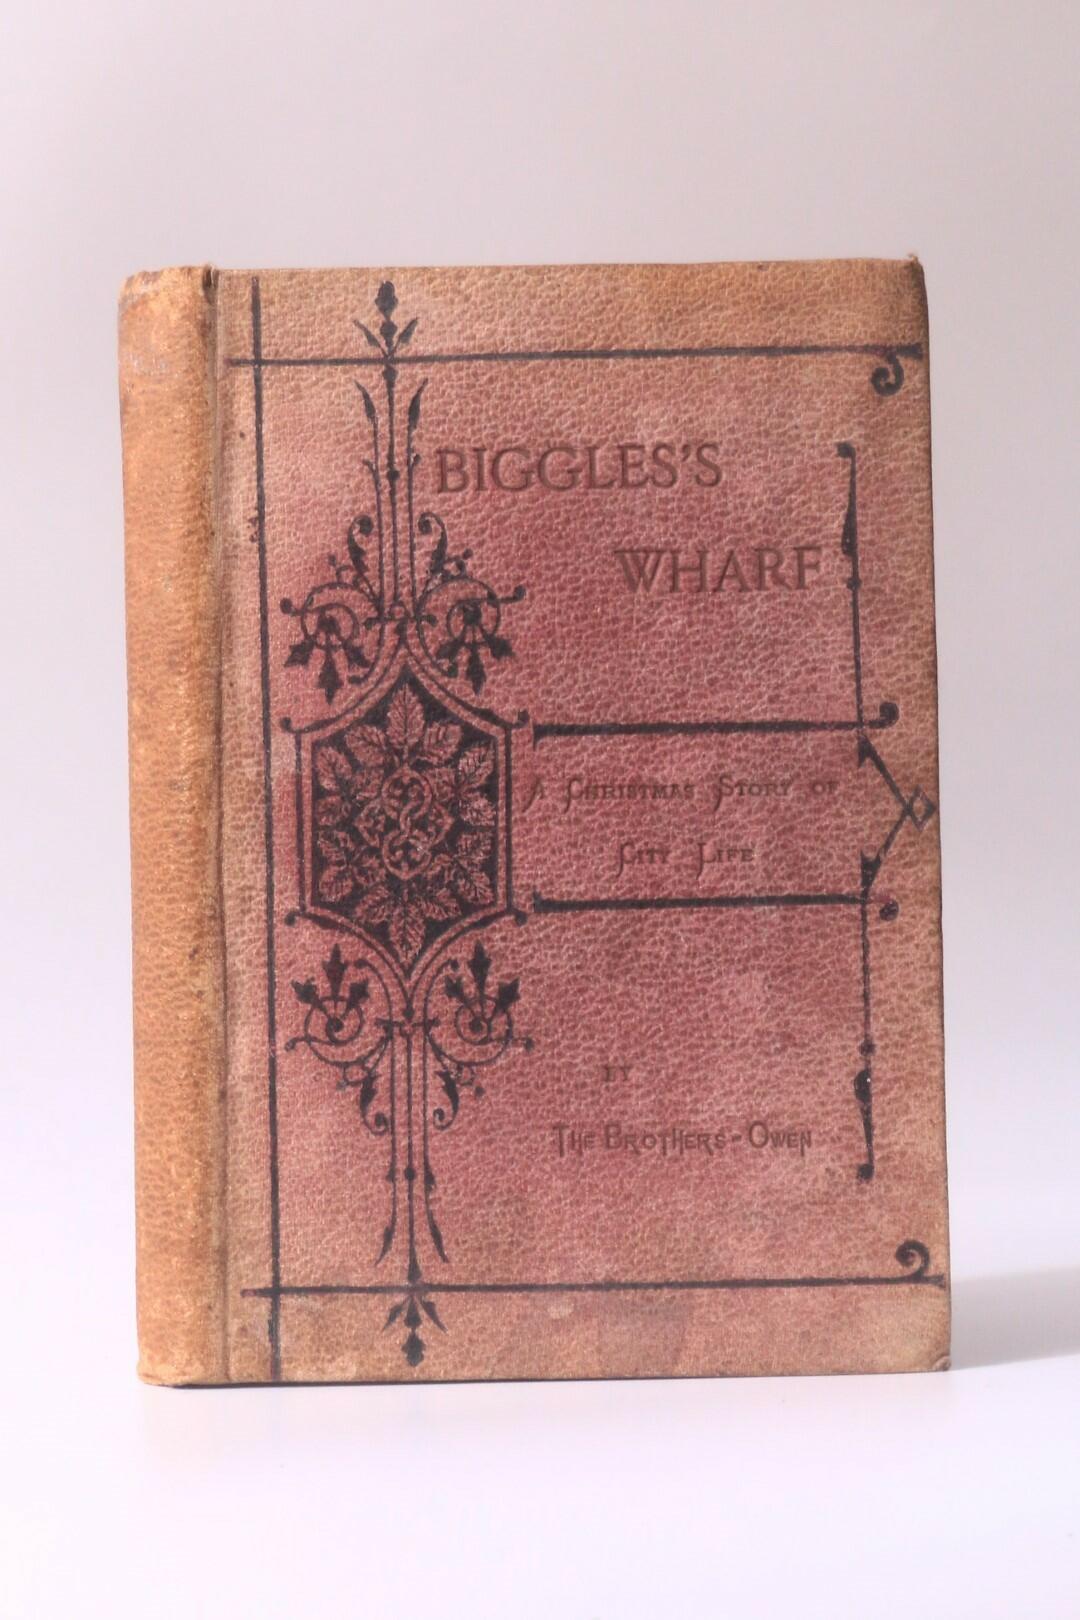 The Brothers Owen - Biggles's Wharf: A Christmas Story of City Life - Ward, Lock & Tyler., nd [1875], First Edition.